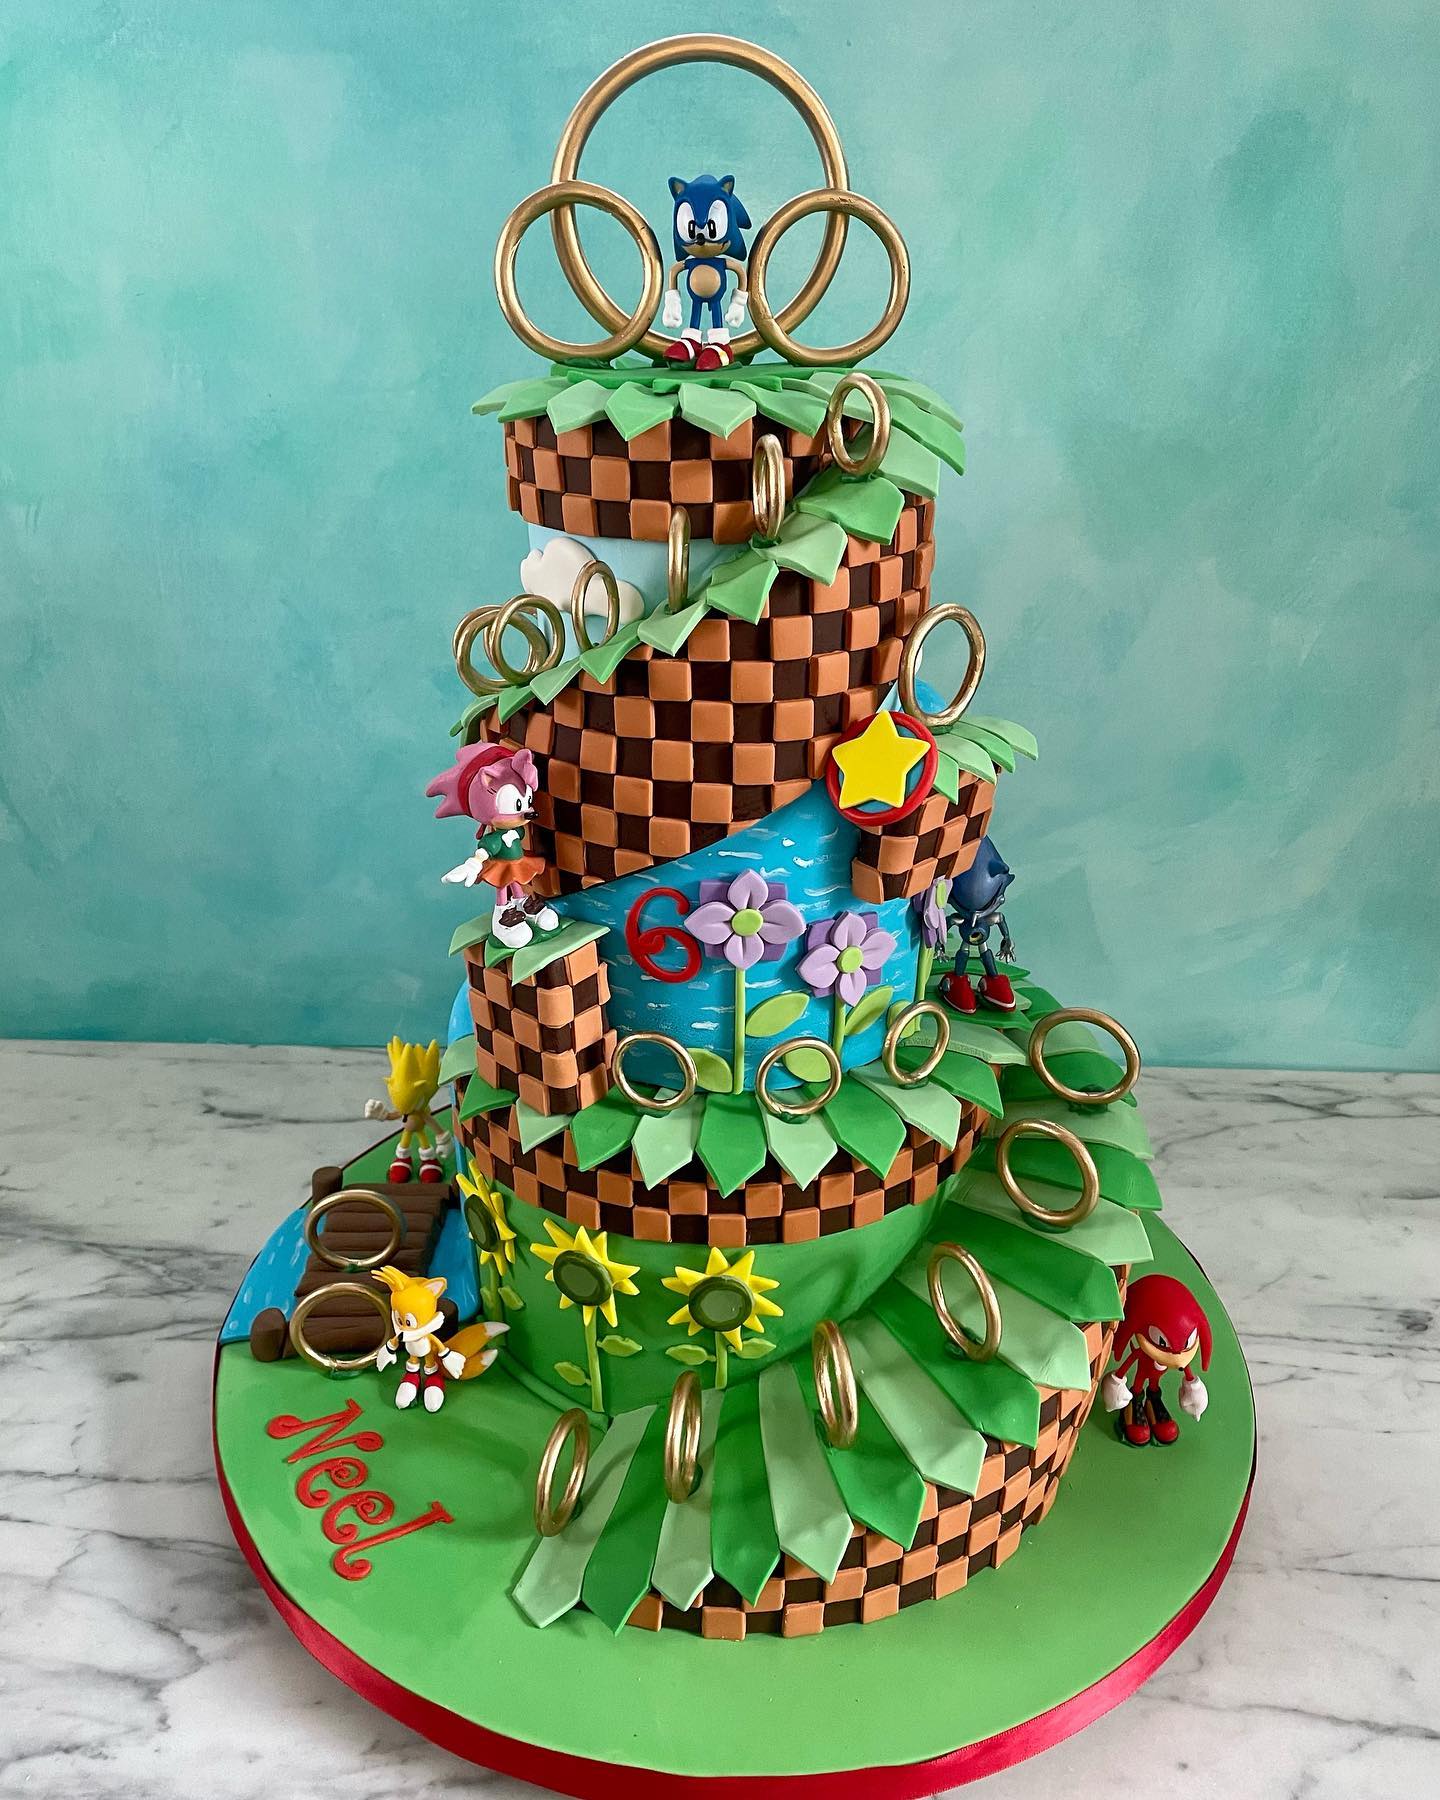 Happy birthday Neel! Love this fun Sonic design. The figurines are toys, all else is edible. #sonicthehedgehog #soniccake #sonicthehedgehogcake #sonic